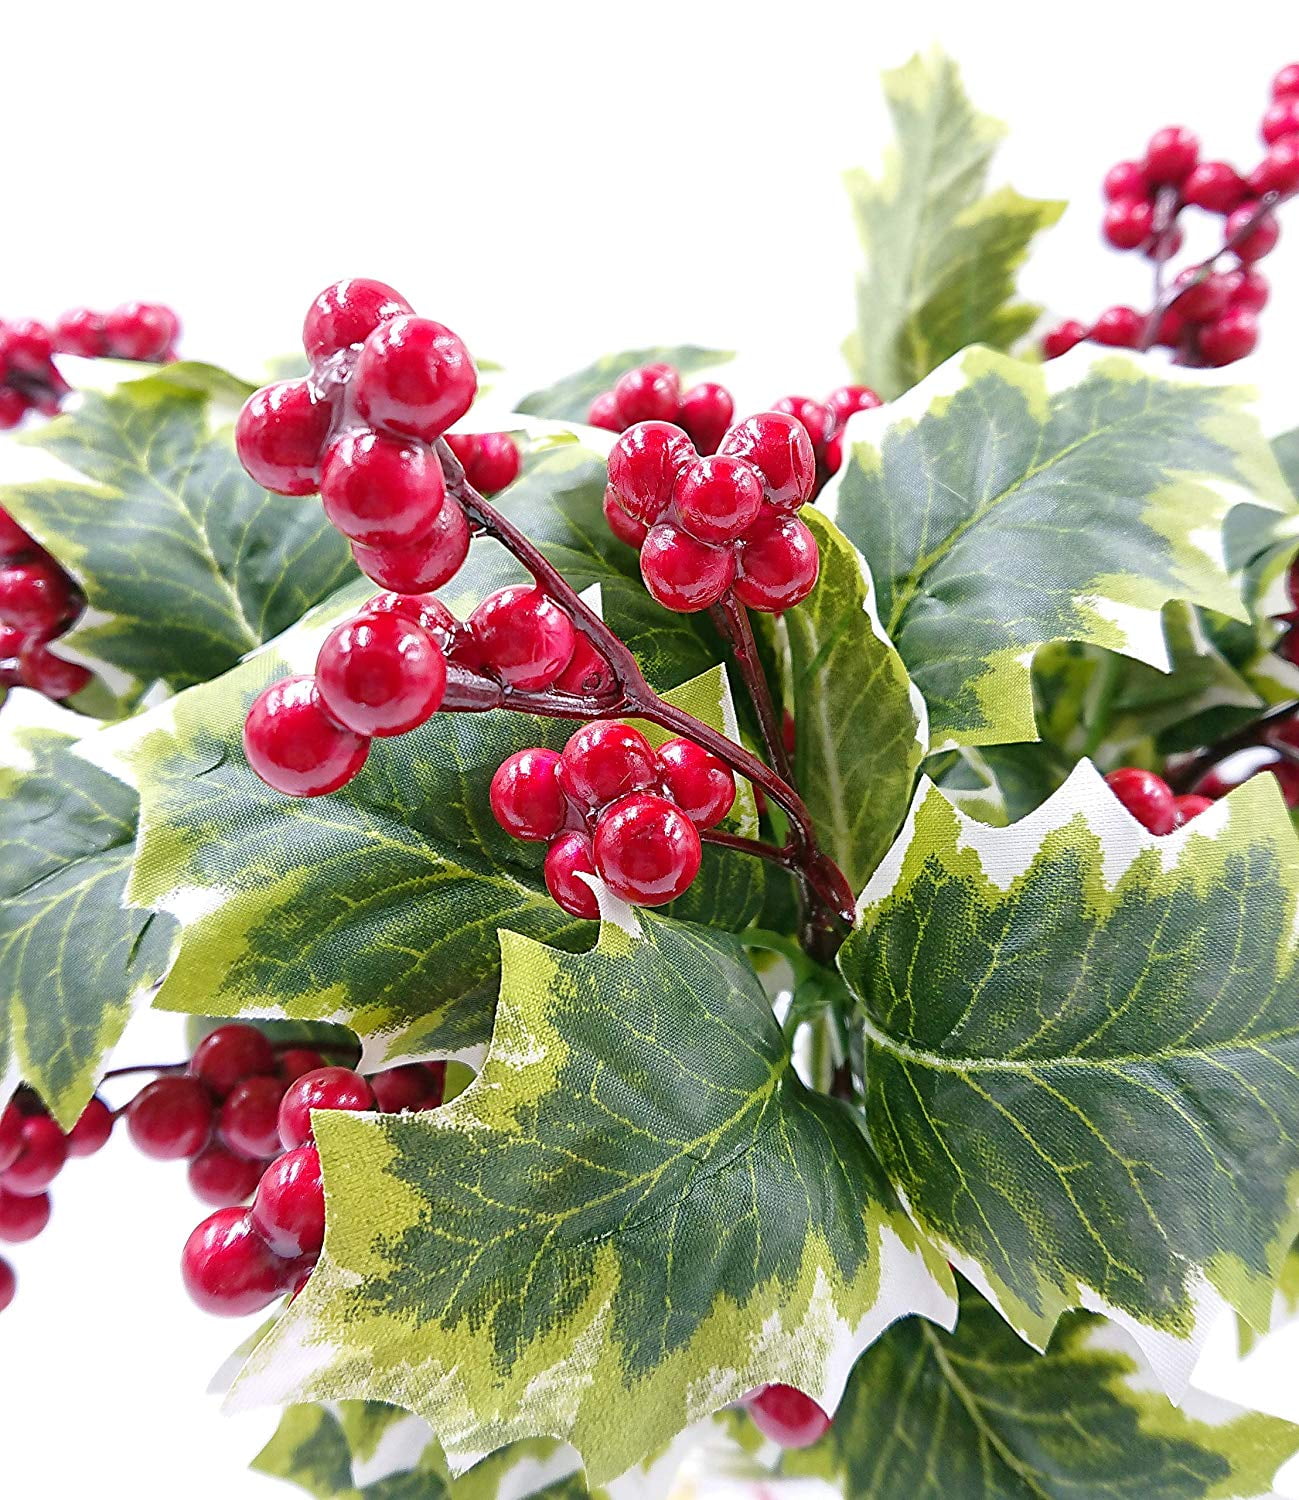 YHDSN 12 Pcs Artificial Christmas Red Berry Picks Holly Berries Flower Stem  Needles Branches Fake Greenery Floral Picks Arrangements for Xmas Wreath